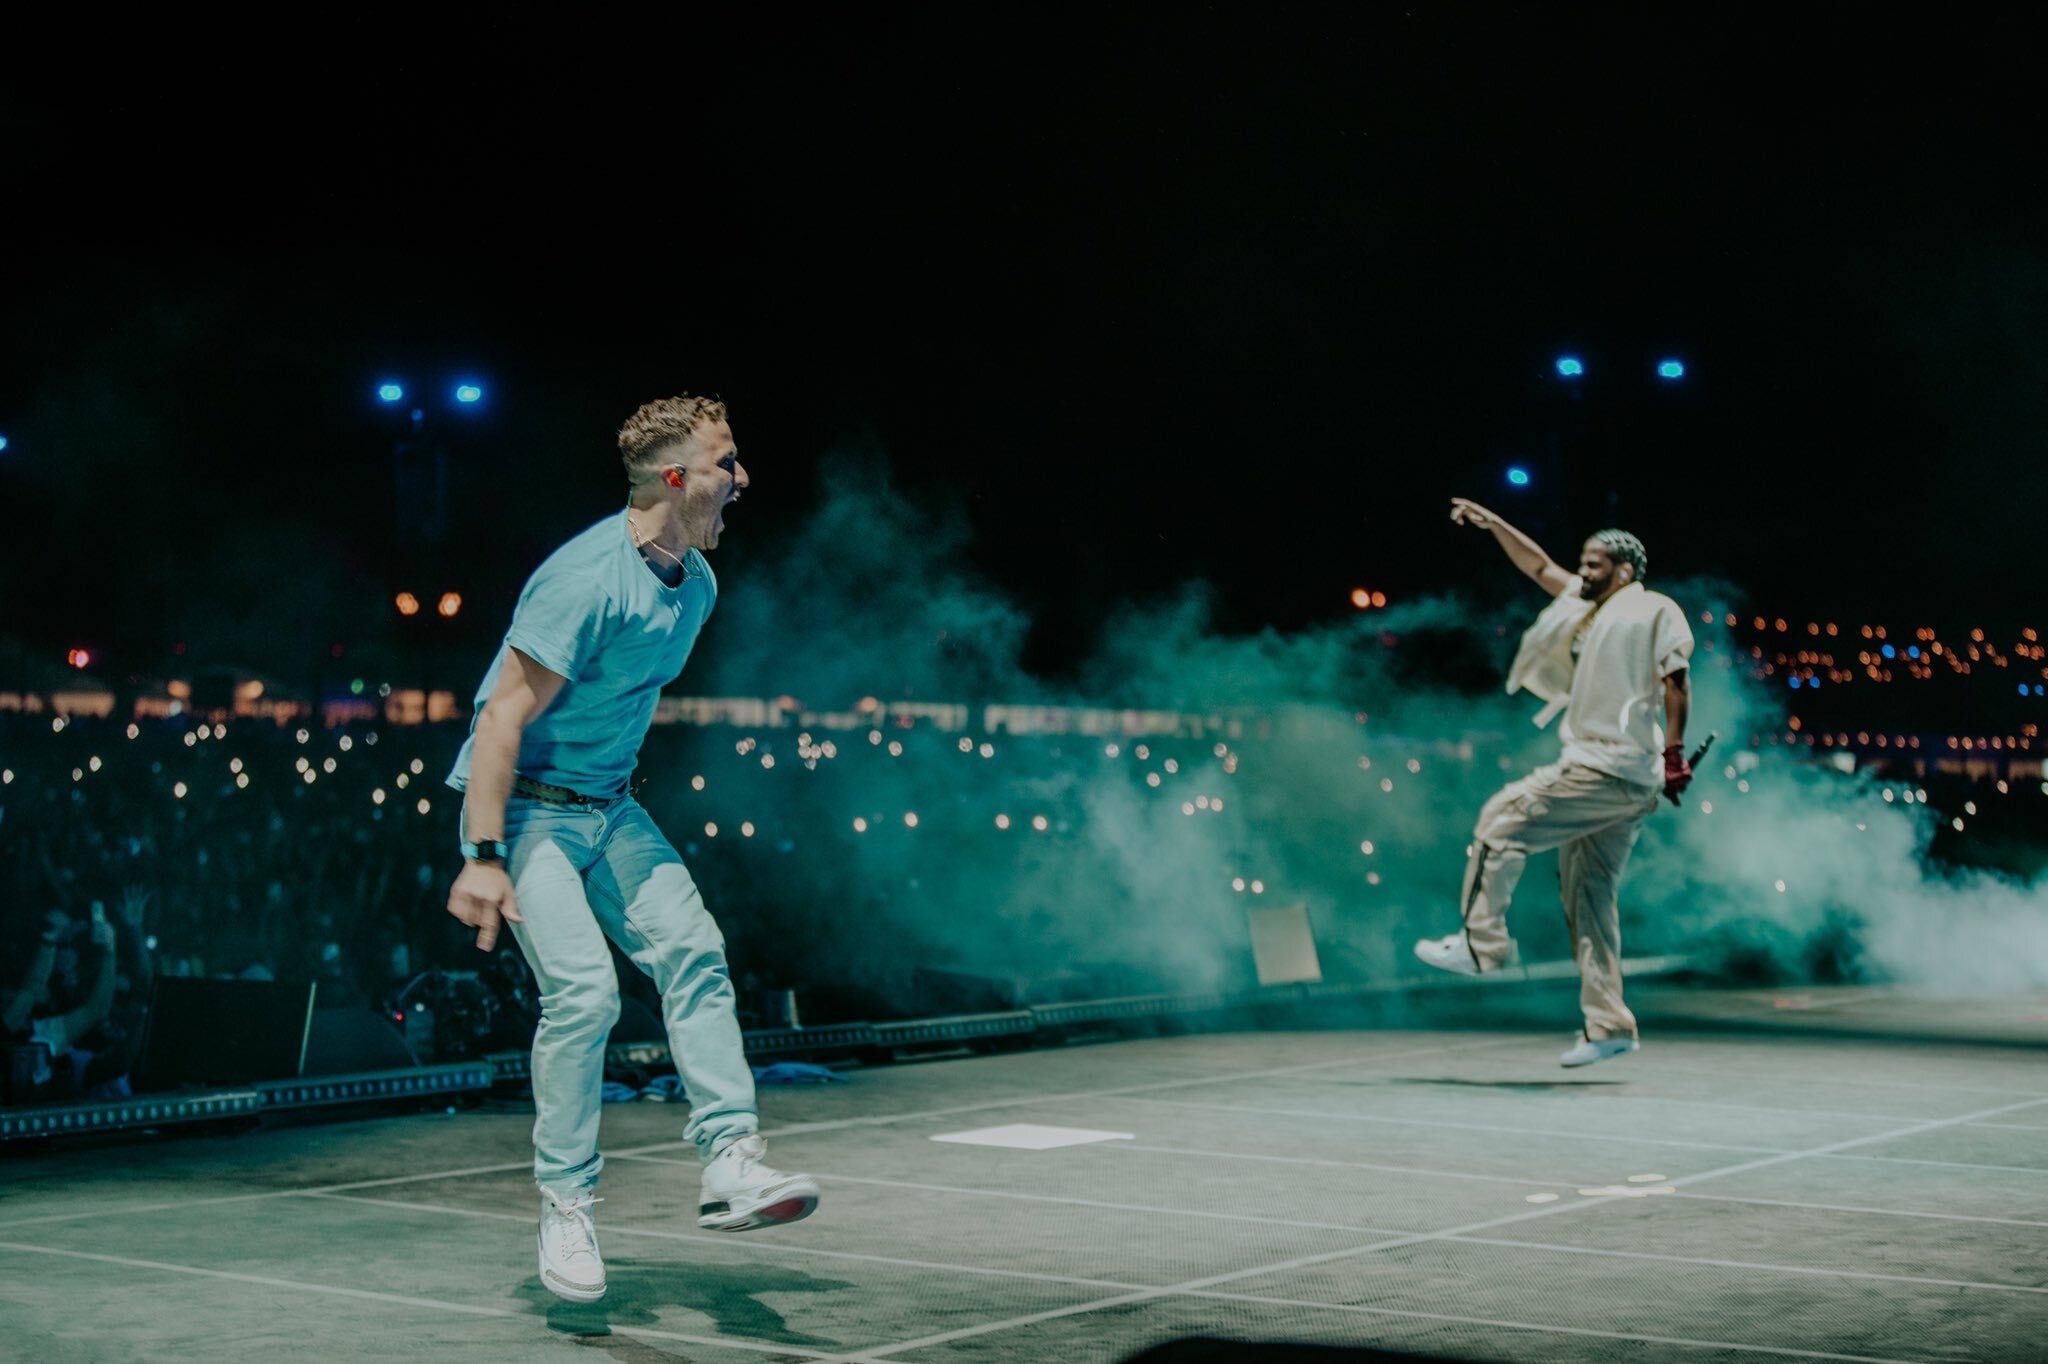 Mike Posner joins Big Sean onstage at 2022 Coachella to perform "Cooler Than Me"
